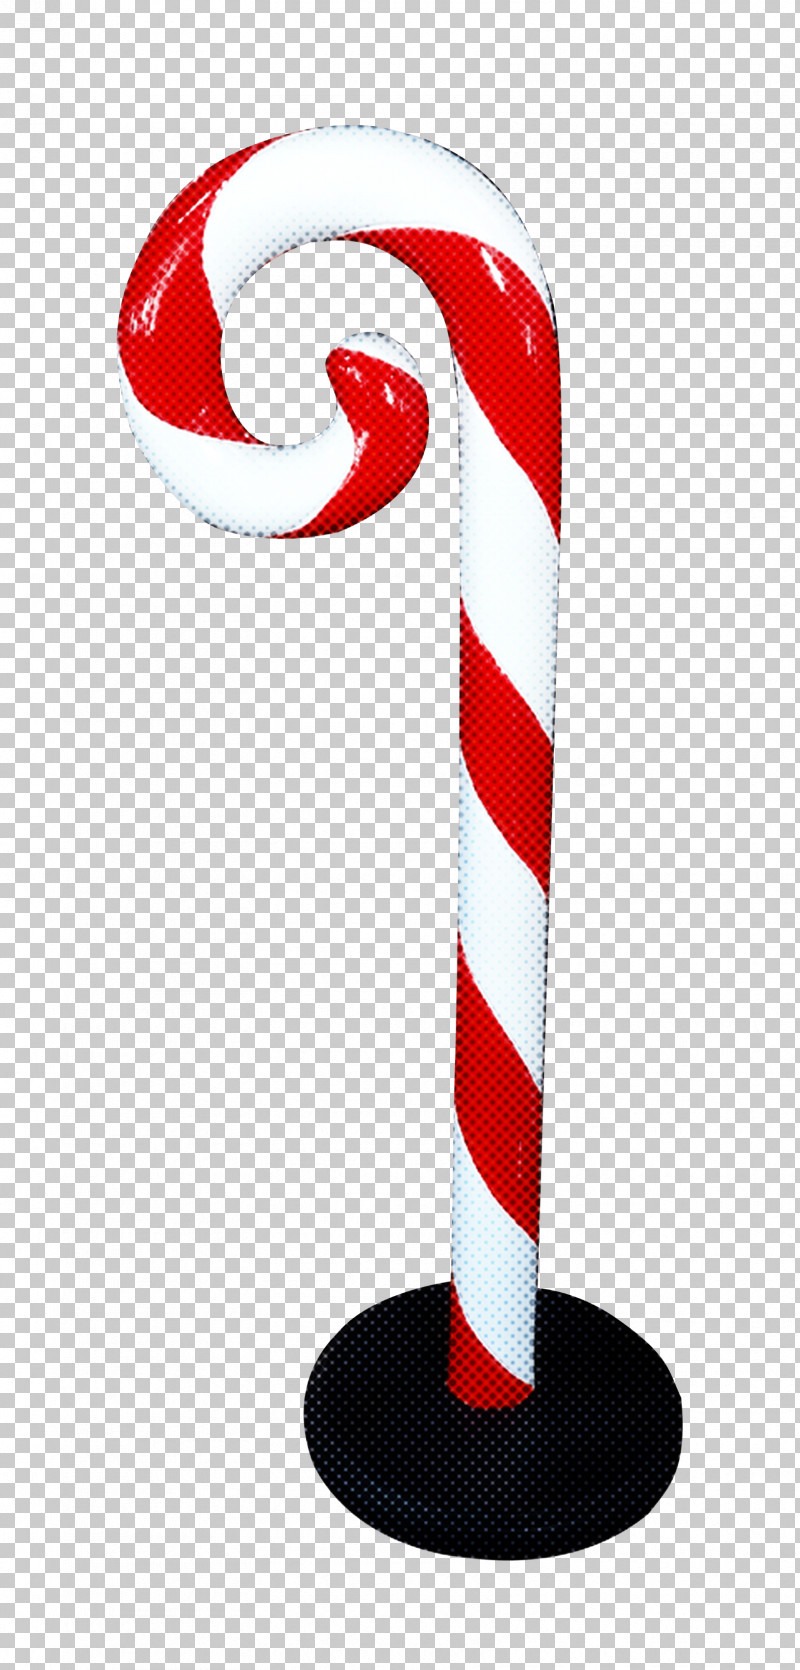 Candy Cane PNG, Clipart, Candy Cane, Christmas, Holiday Free PNG Download